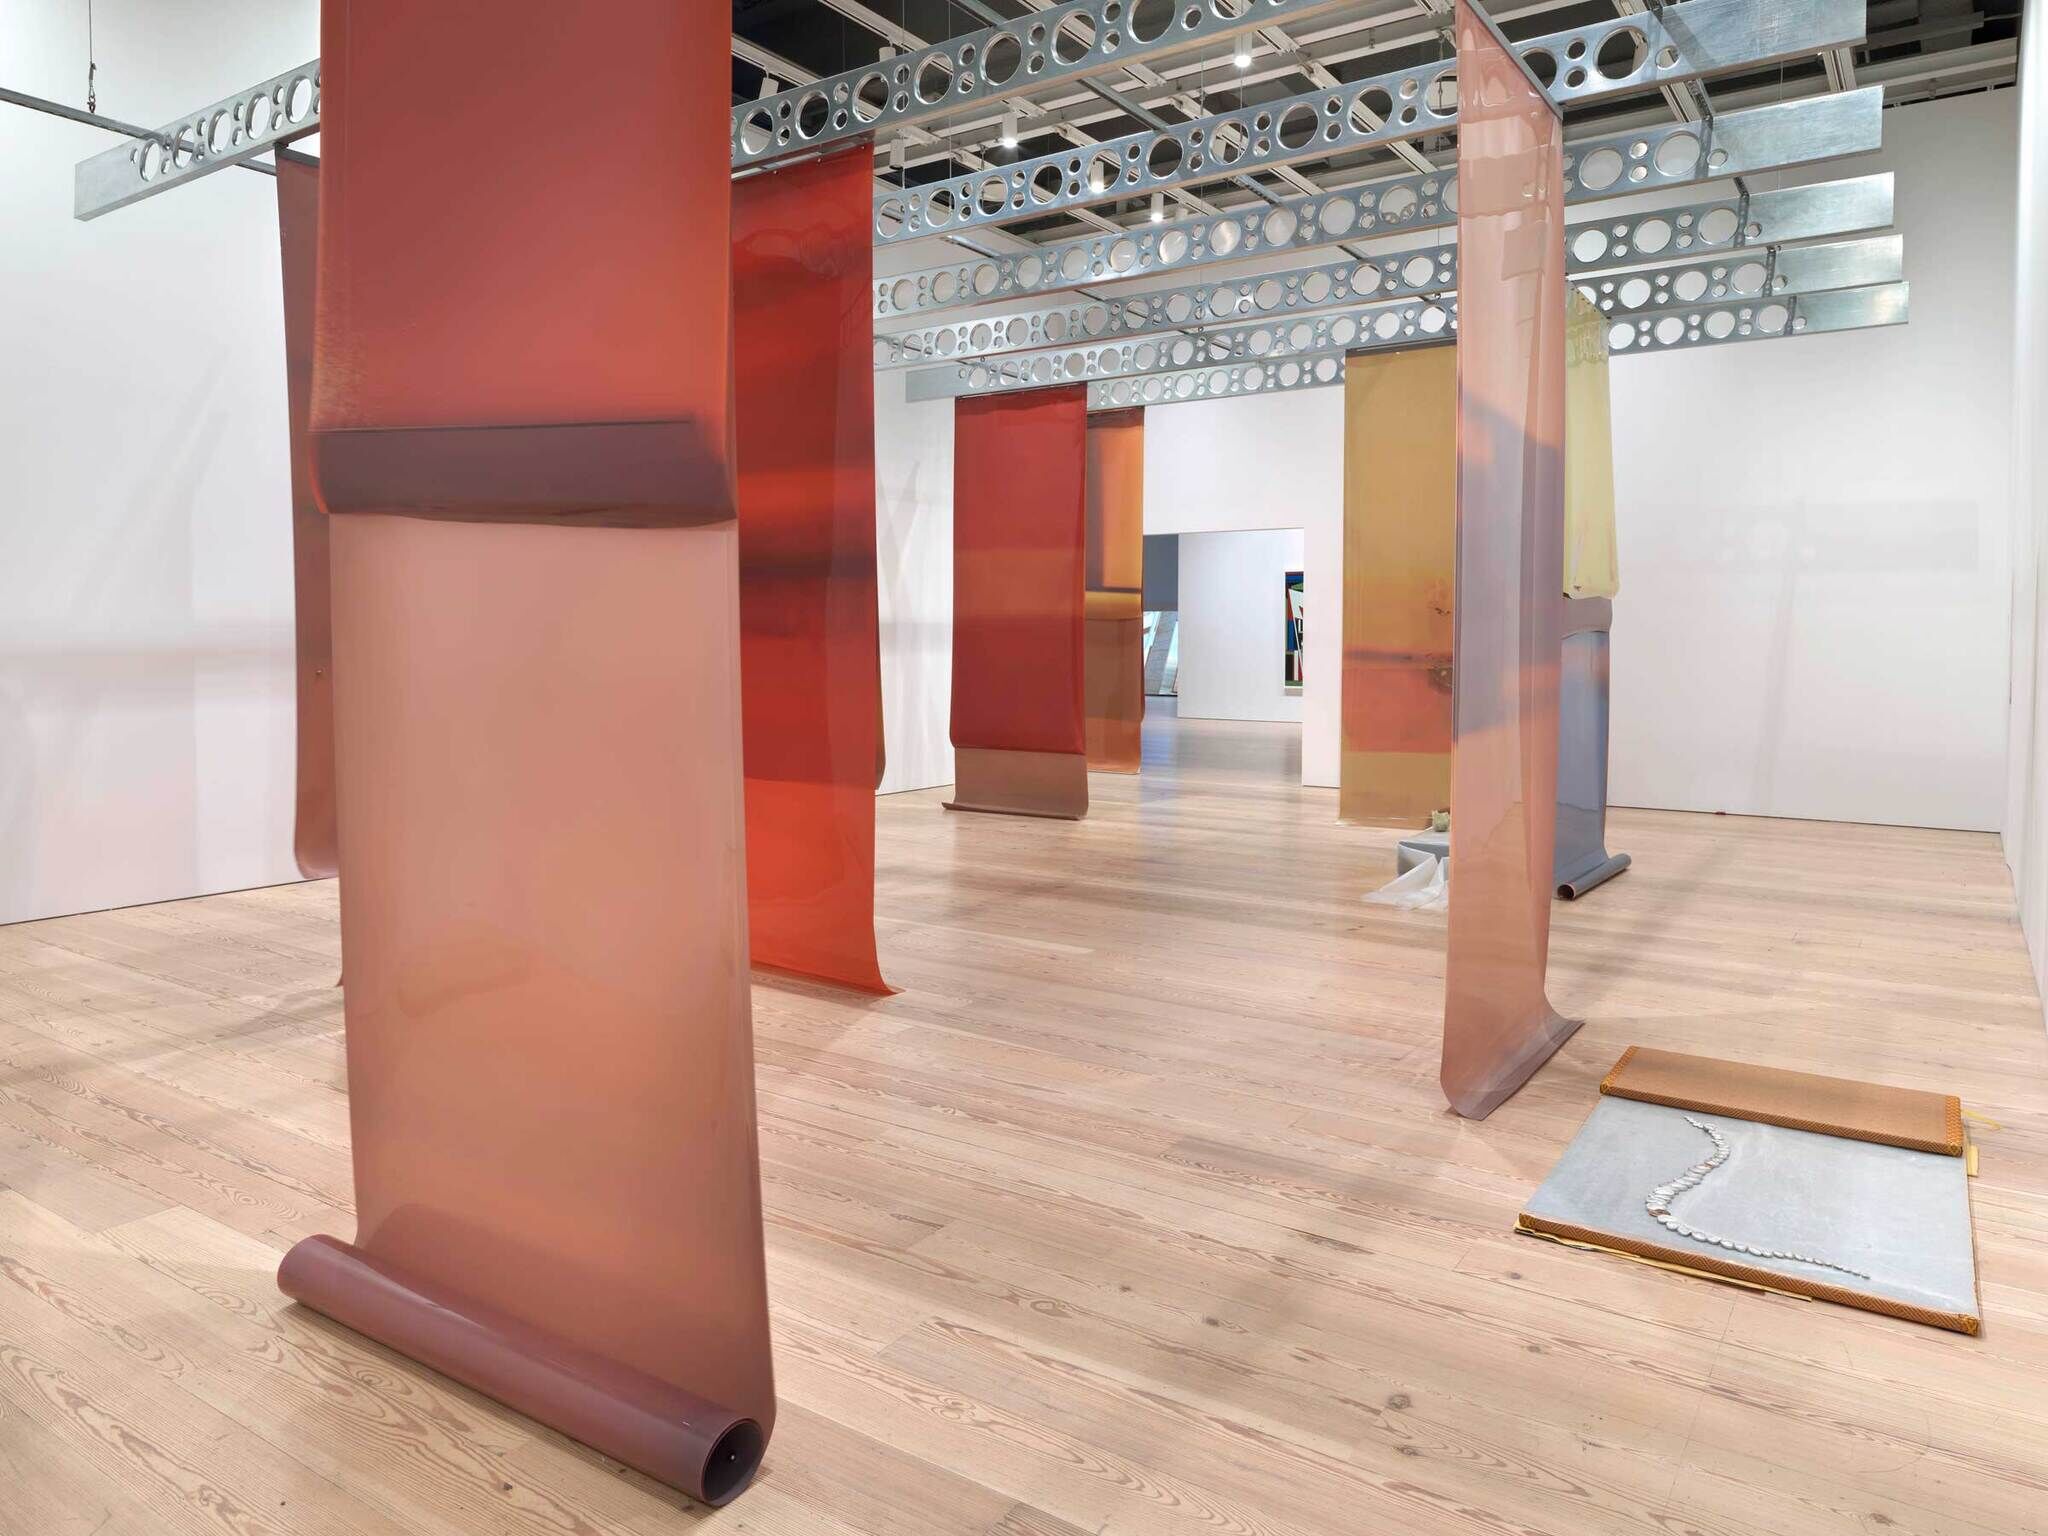 Modern art installation with translucent red film panels in a gallery with wooden floors and industrial ceiling.